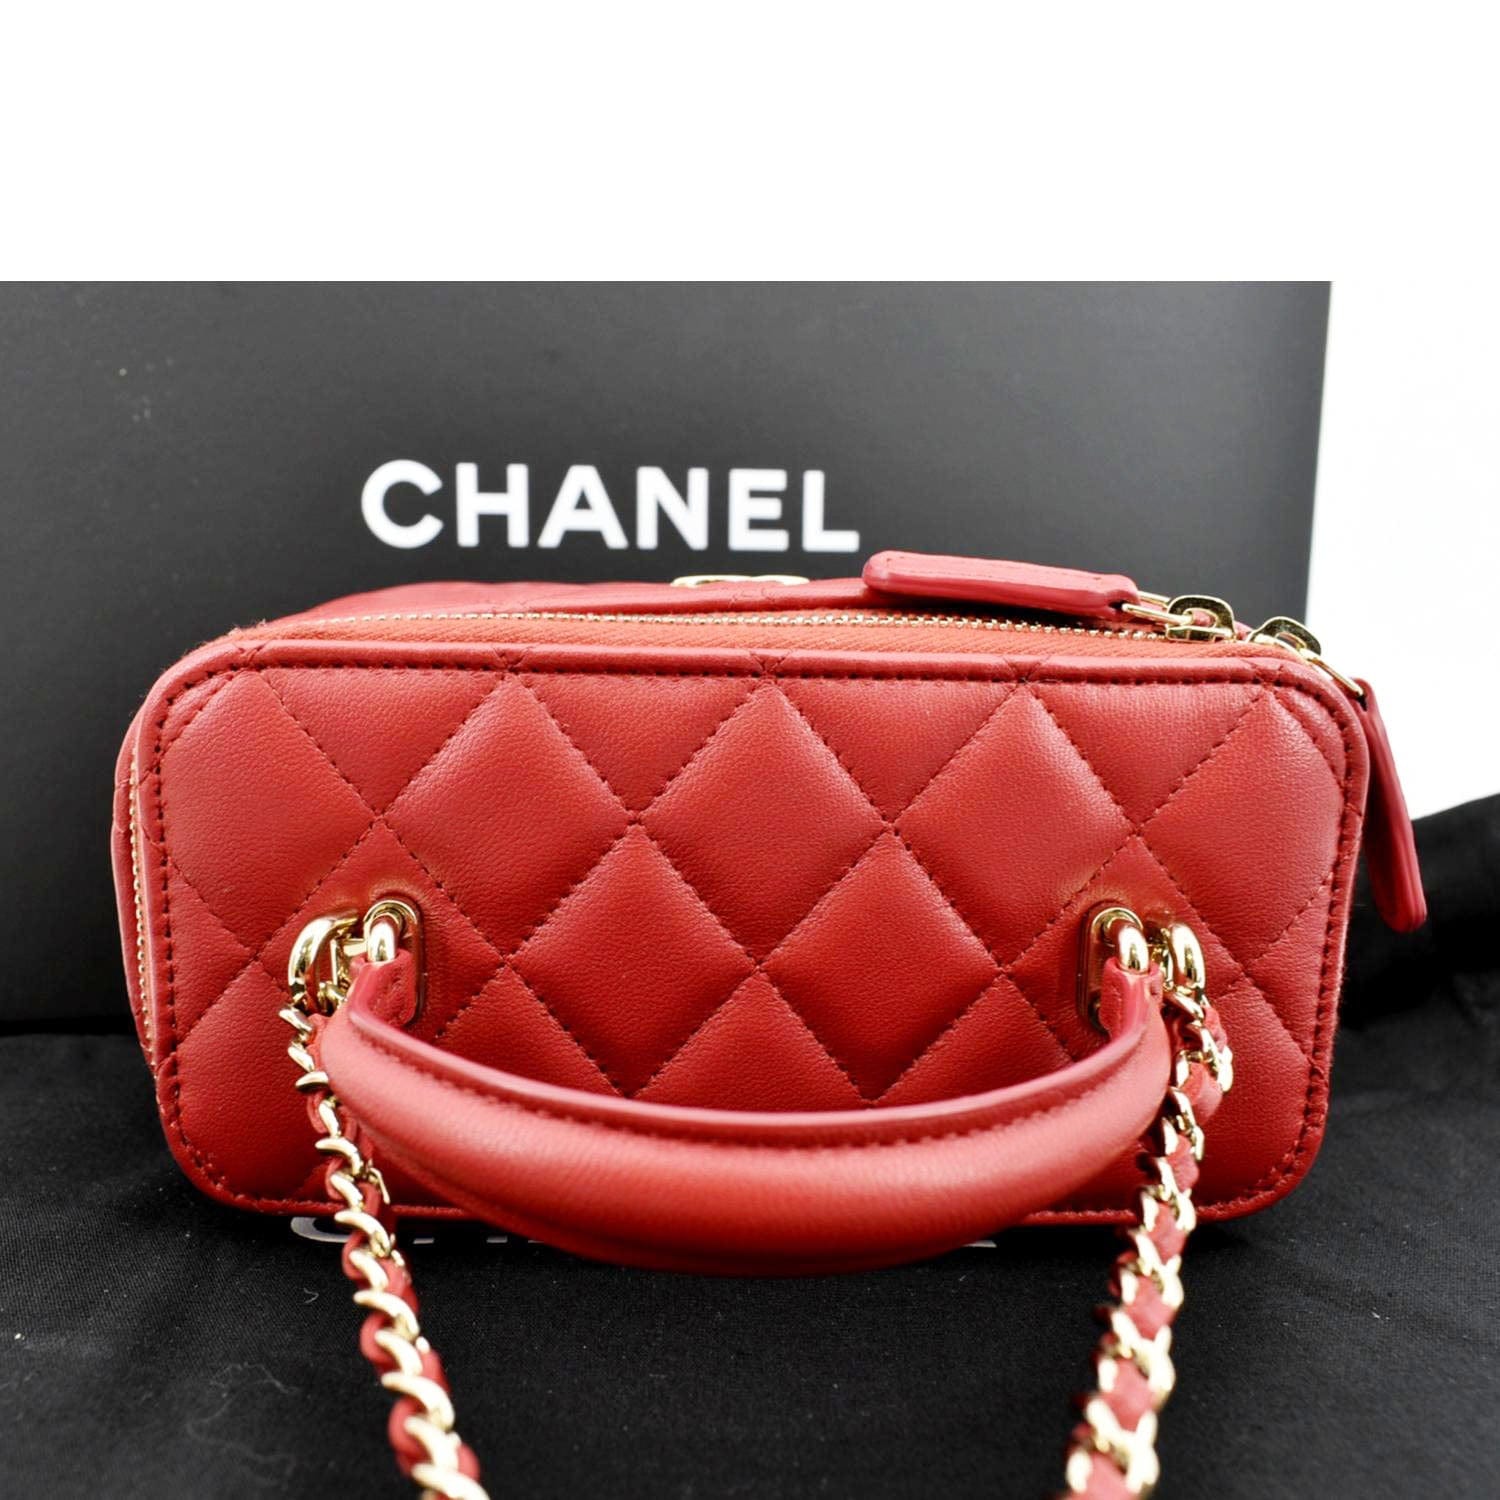 chanel black and red bags bag